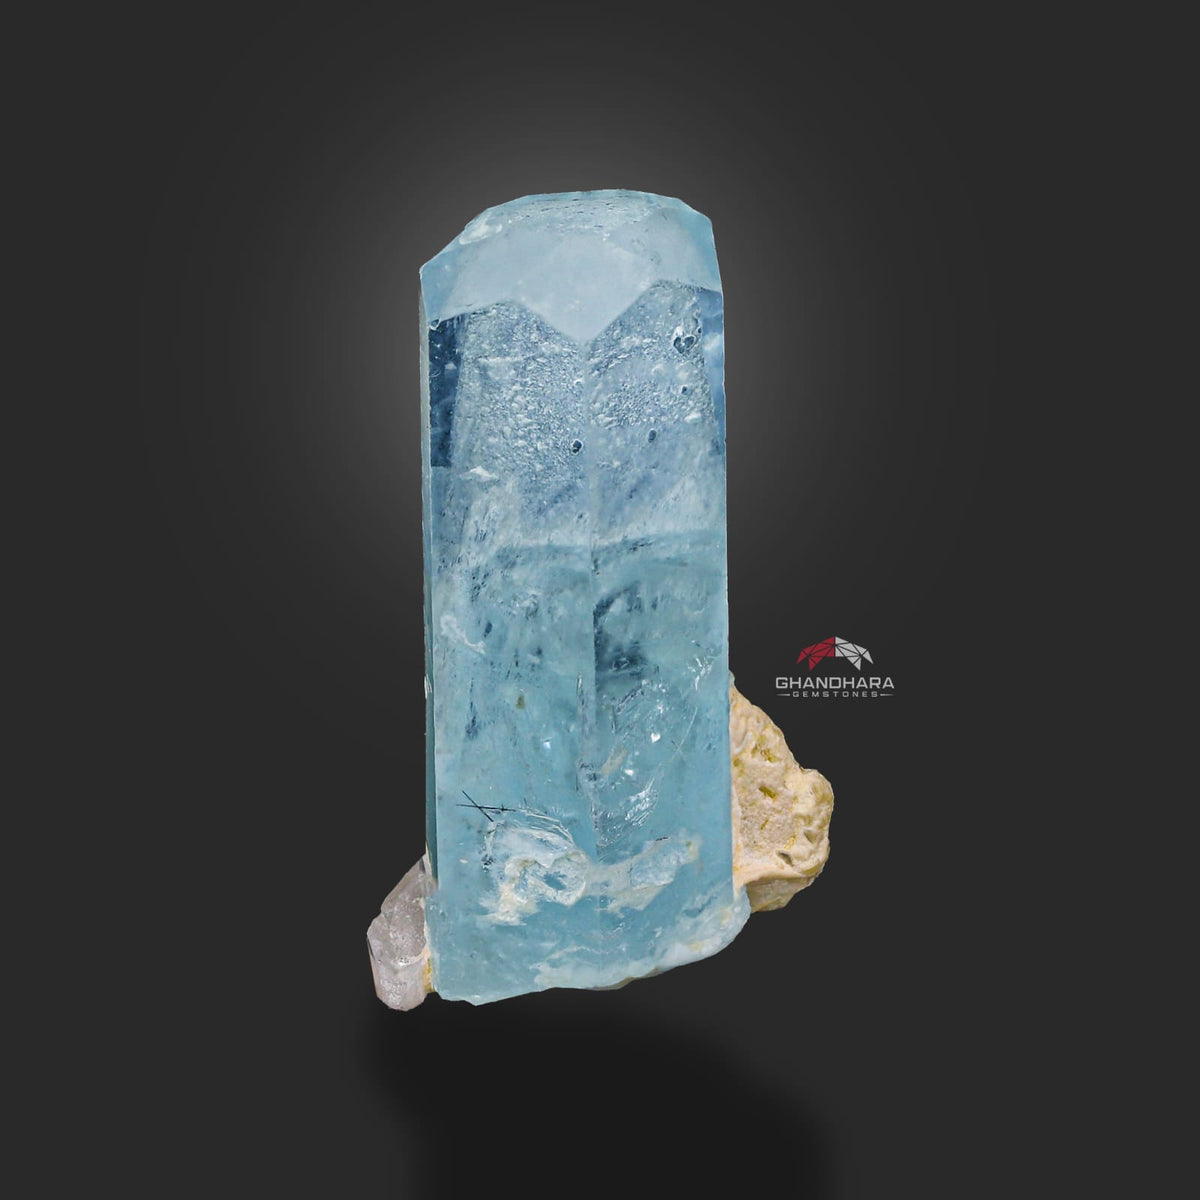 Gem Aquamarine Crystal Nicely Positioned On White Albite